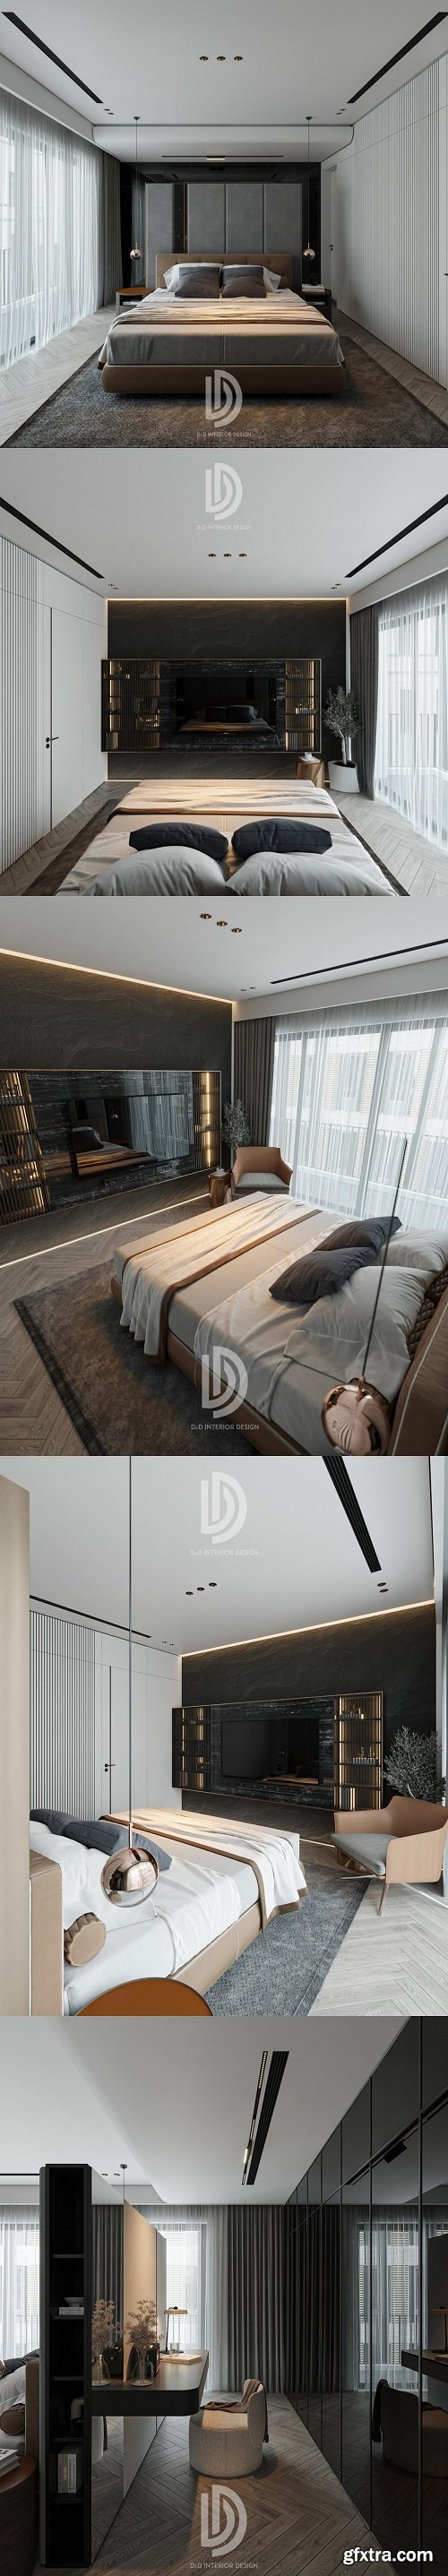 Master Bedroom Interior by Pham Dung